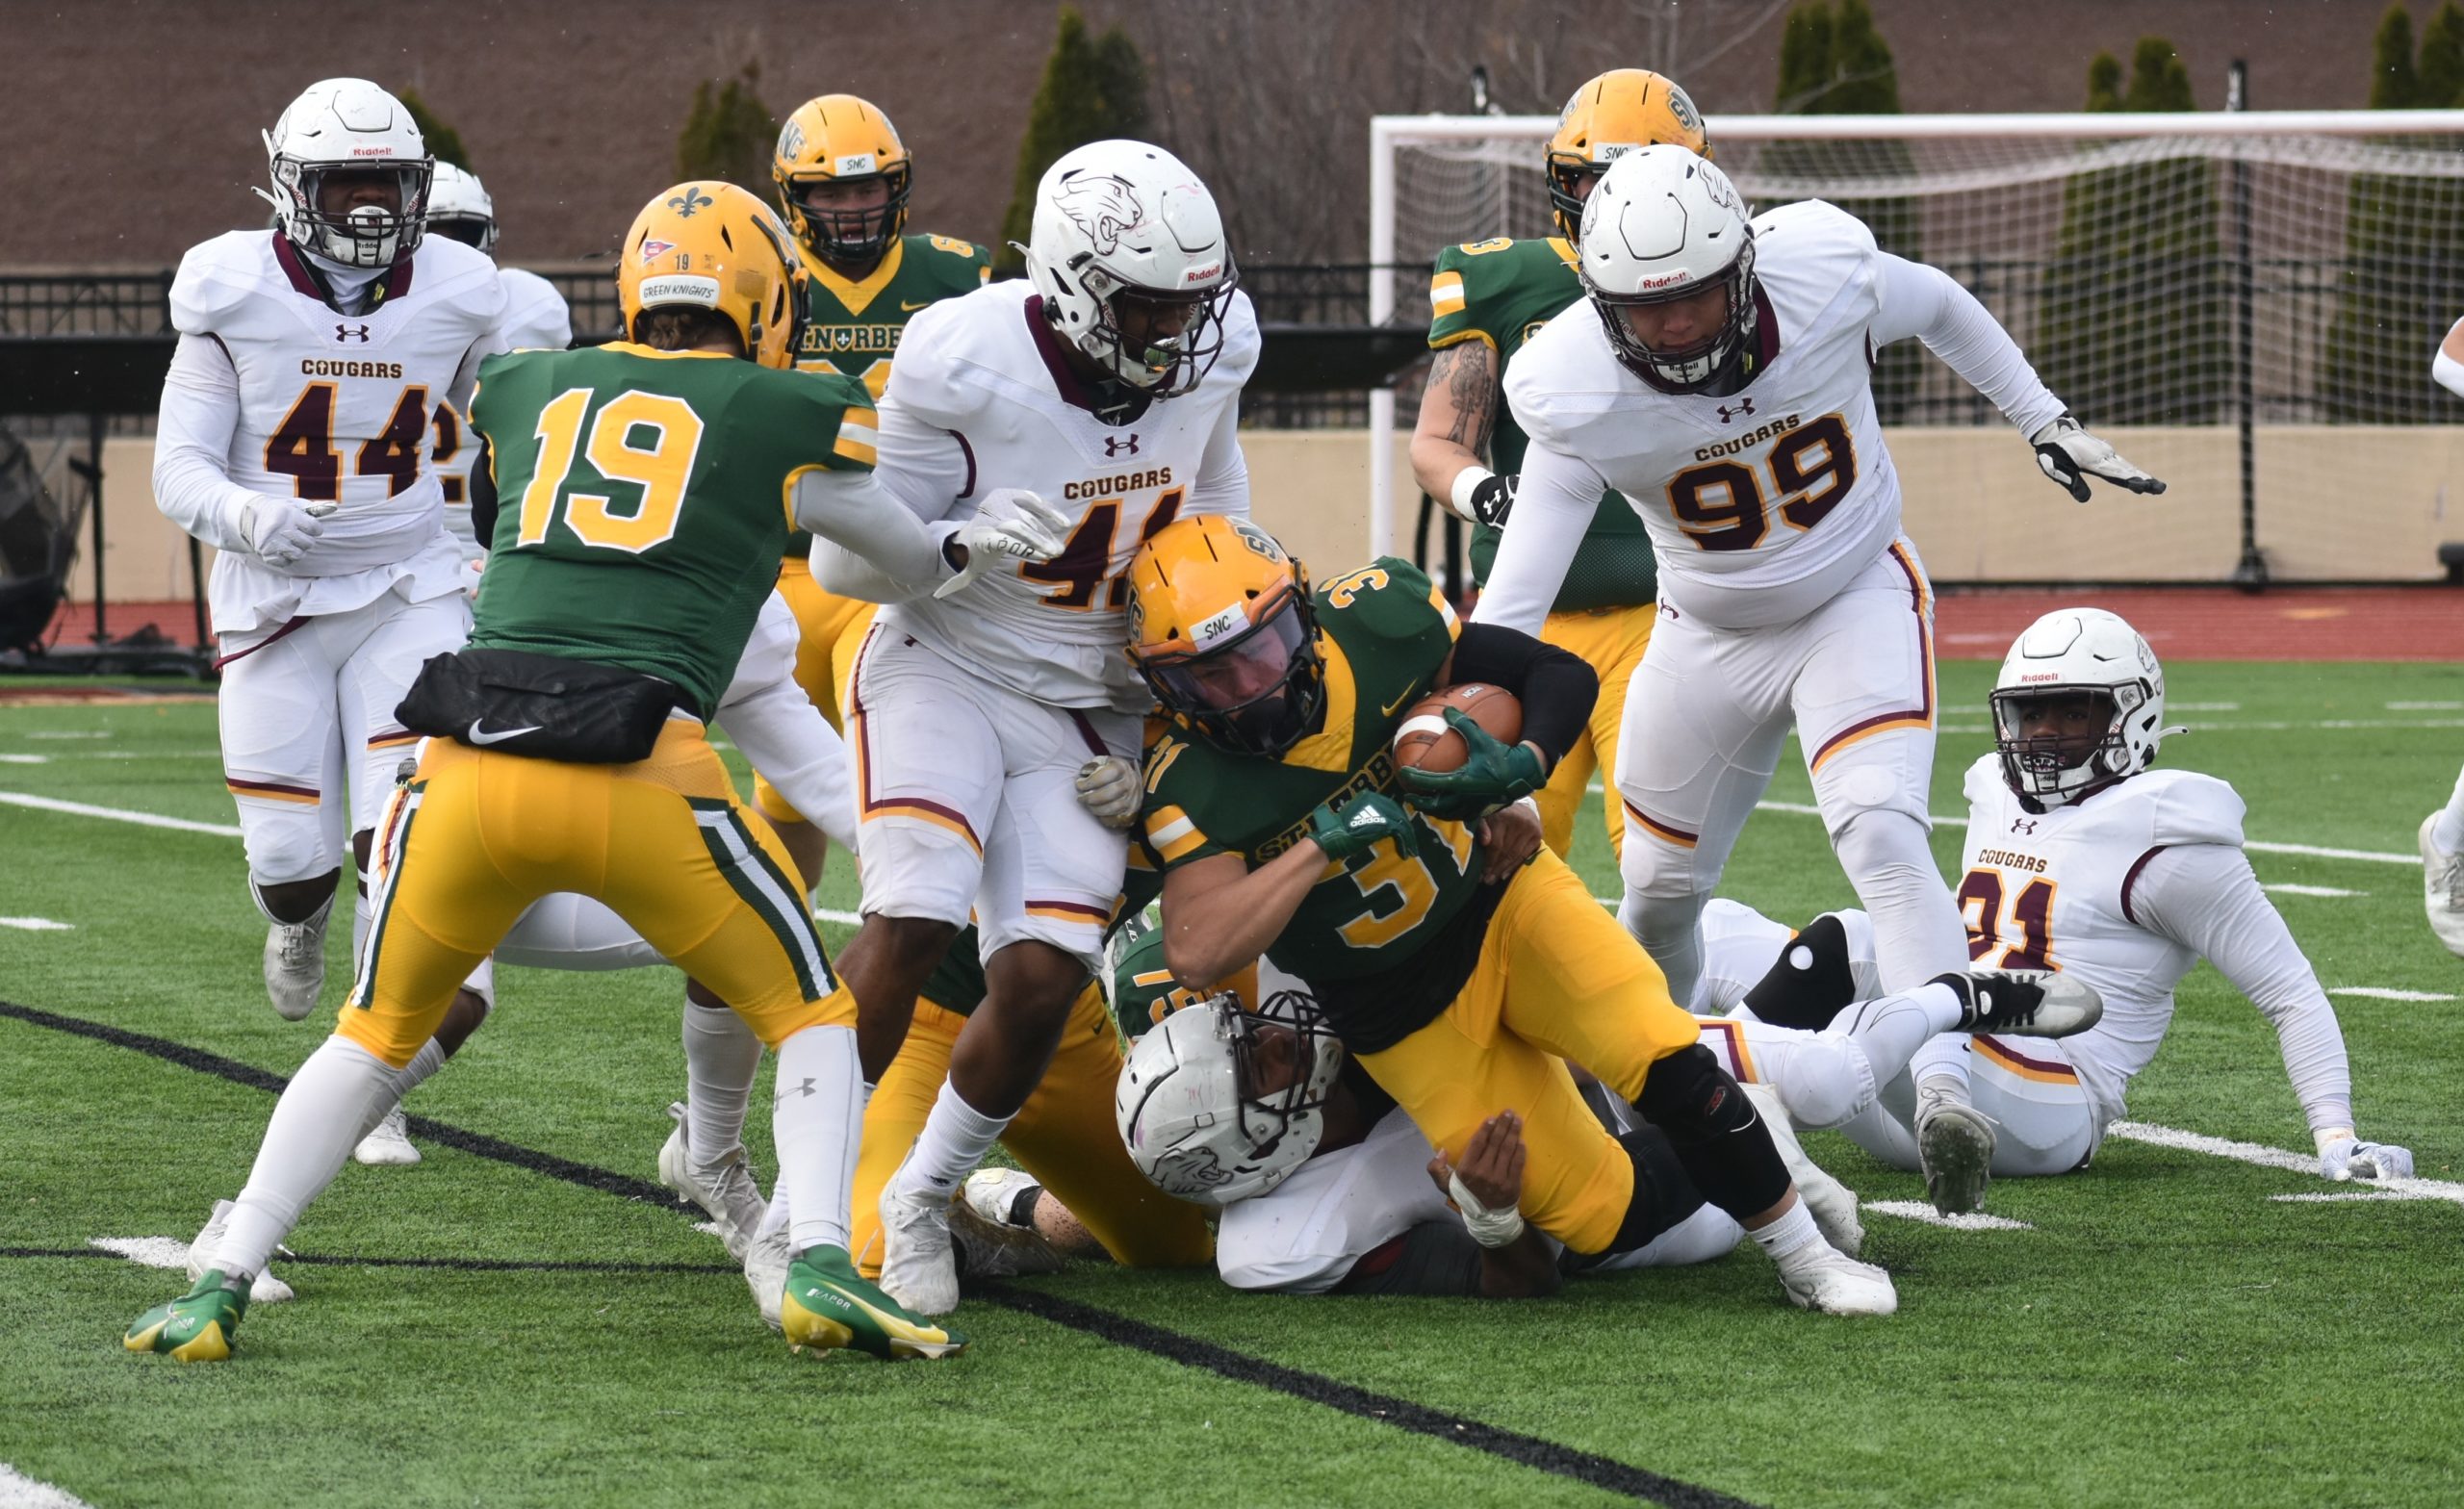 SNC closes out season with shutout win - The Press